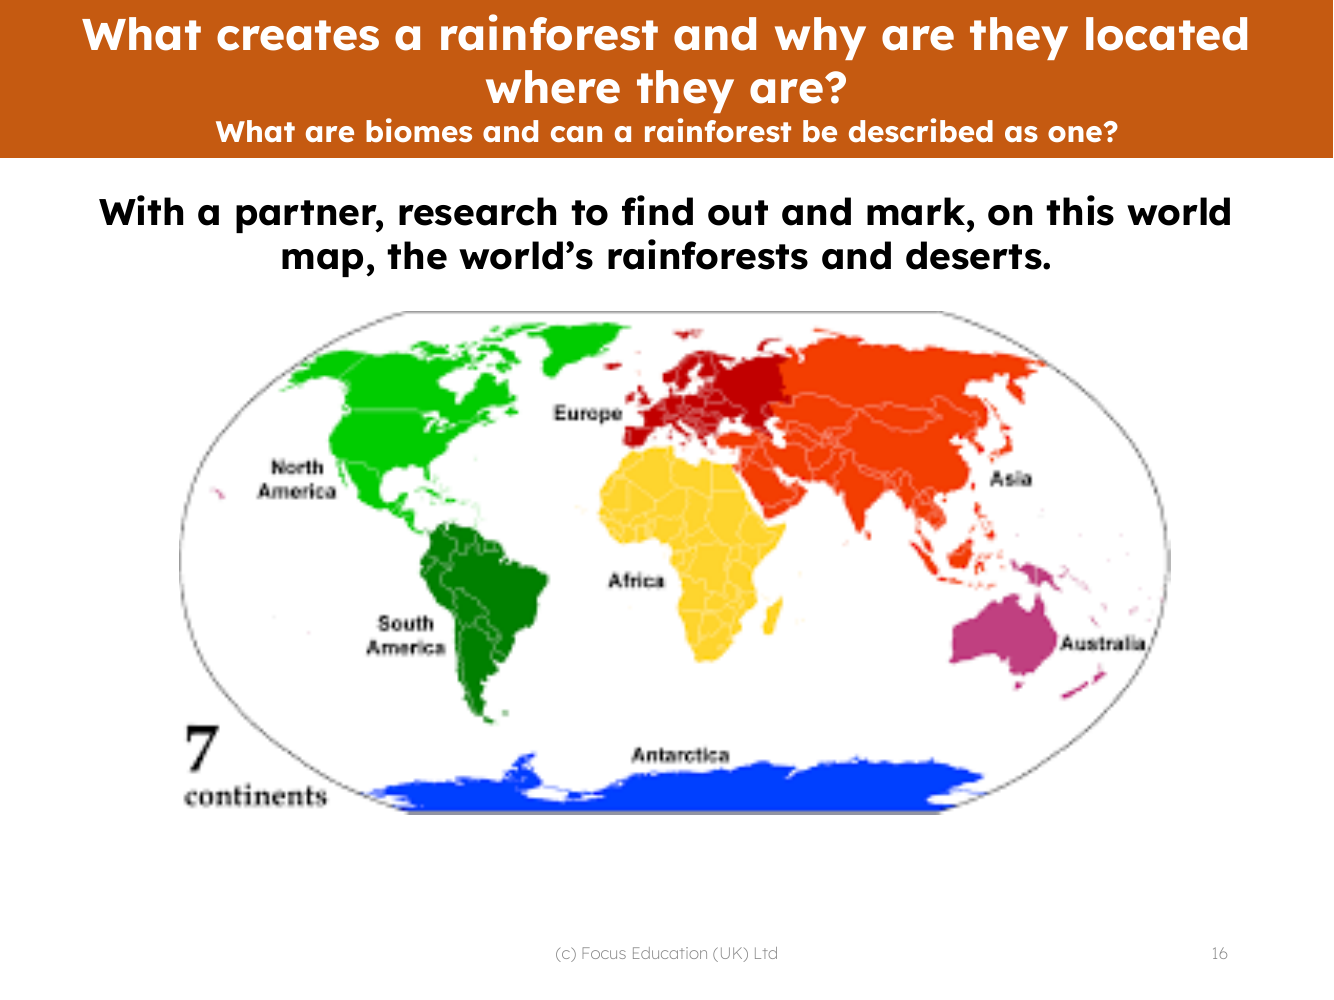 Locate on a map - Rainforests